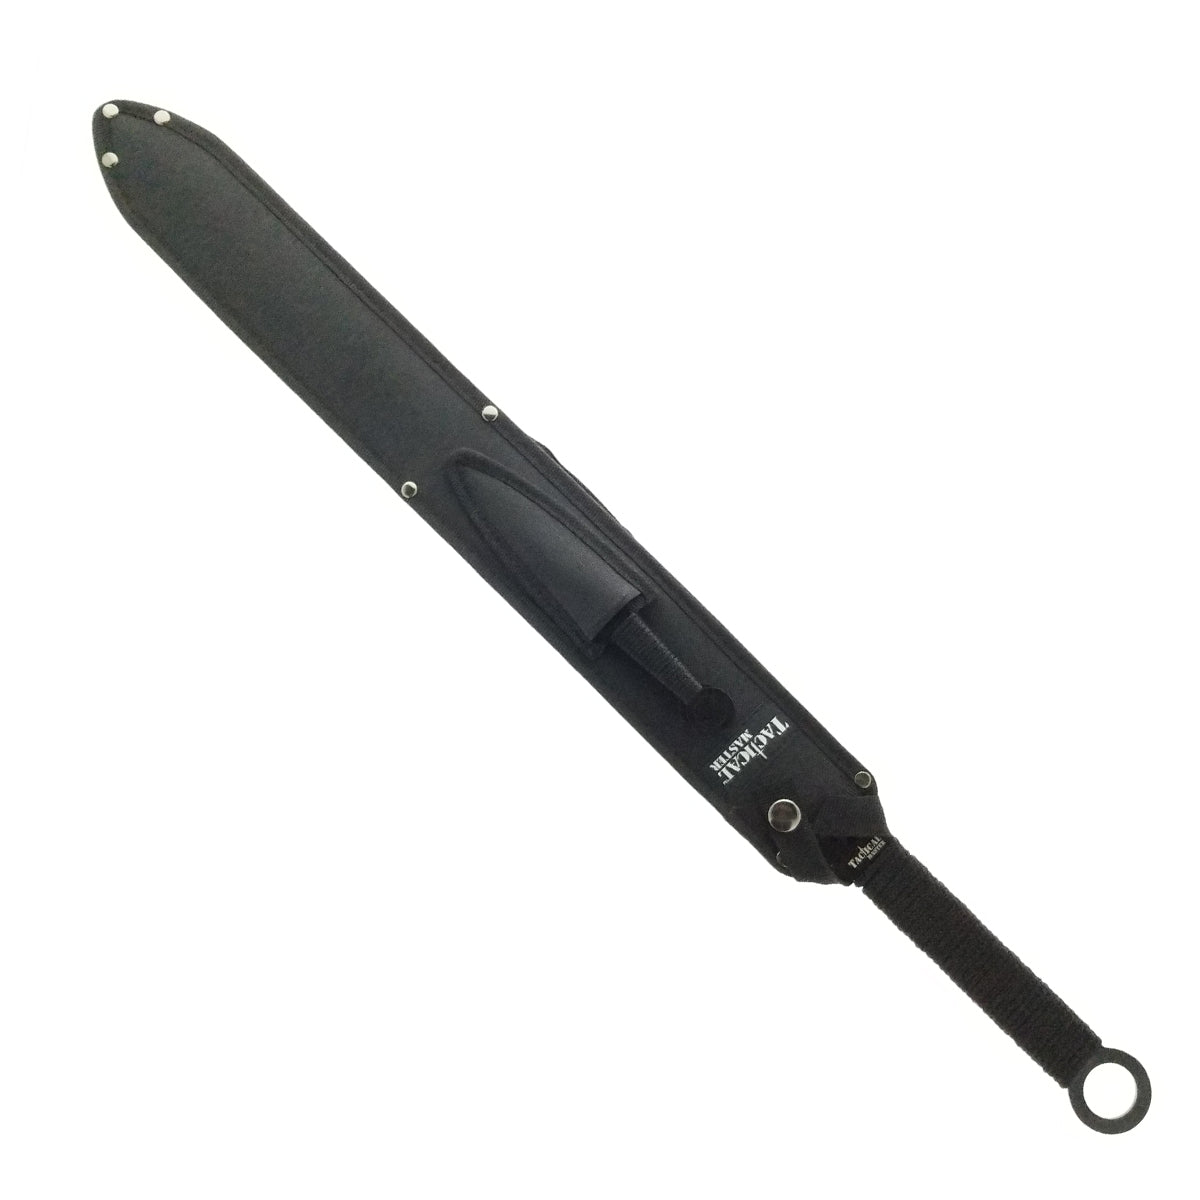 27" Machete with 2 pcs 6" throwing knives, TACTICAL MASTER